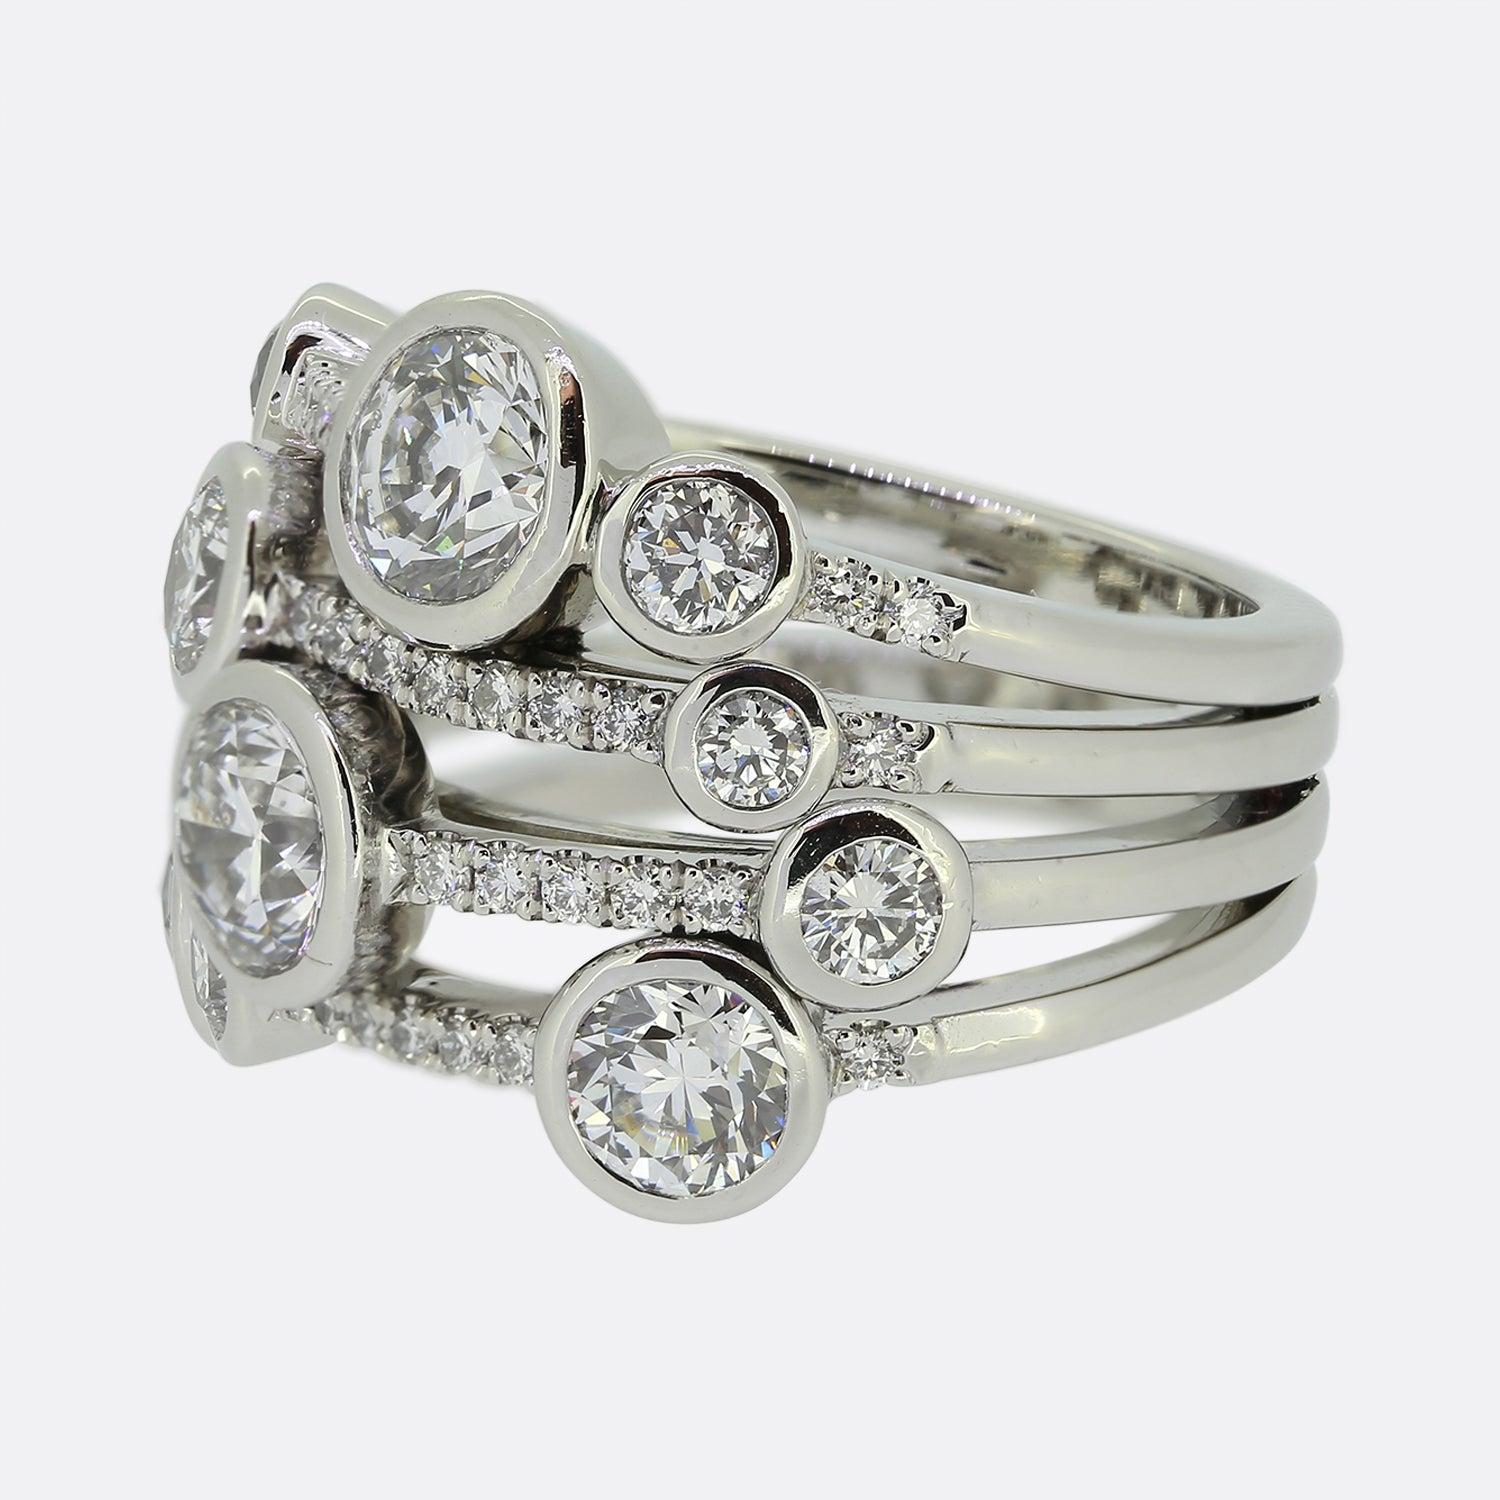 Here we have a beautifully crafted diamond ring from the world renowned luxury jewellery designer, Boodles. This ring forms part of the waterfall collection and is the large model. The round brilliant cut diamonds are set over four rows and the